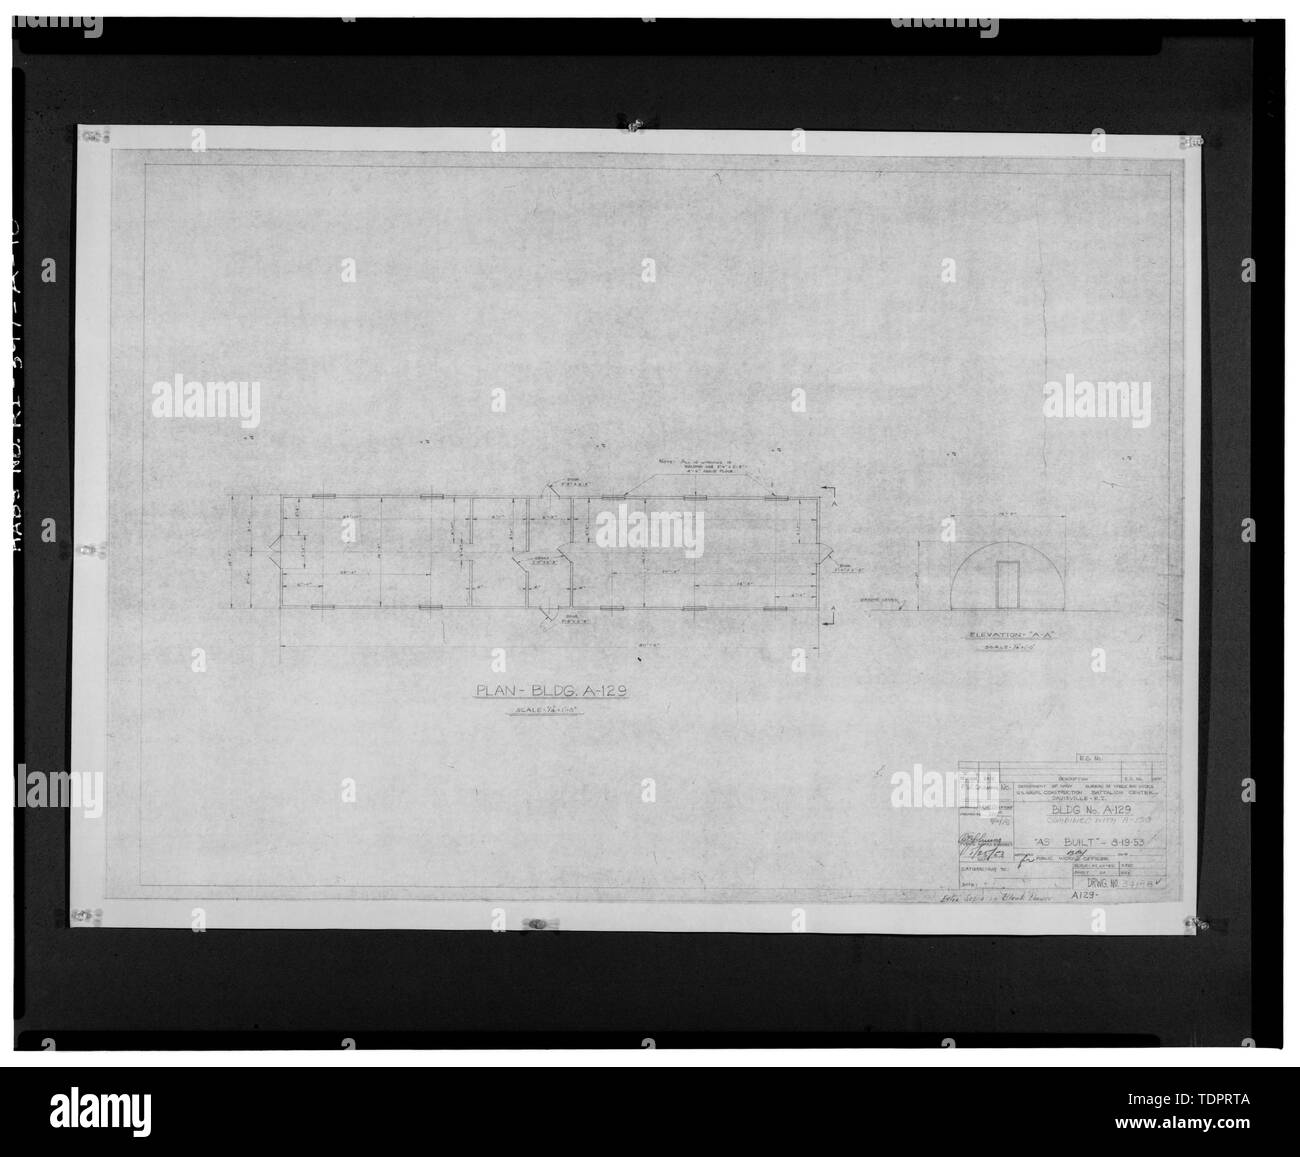 Photographic copy of the Naval Engineering drawing (original is located at Naval Construction Battalion Center, Davisville, RI) Floor plan and elevation of building A-129, drawing number 34198, dated Aug. 1953 - Advance Base Depot, Davisville, Building A-130, Northeast section of Advance Base Depot, adjacent to Pier No. 1, Davisville, Washington County, RI Stock Photo